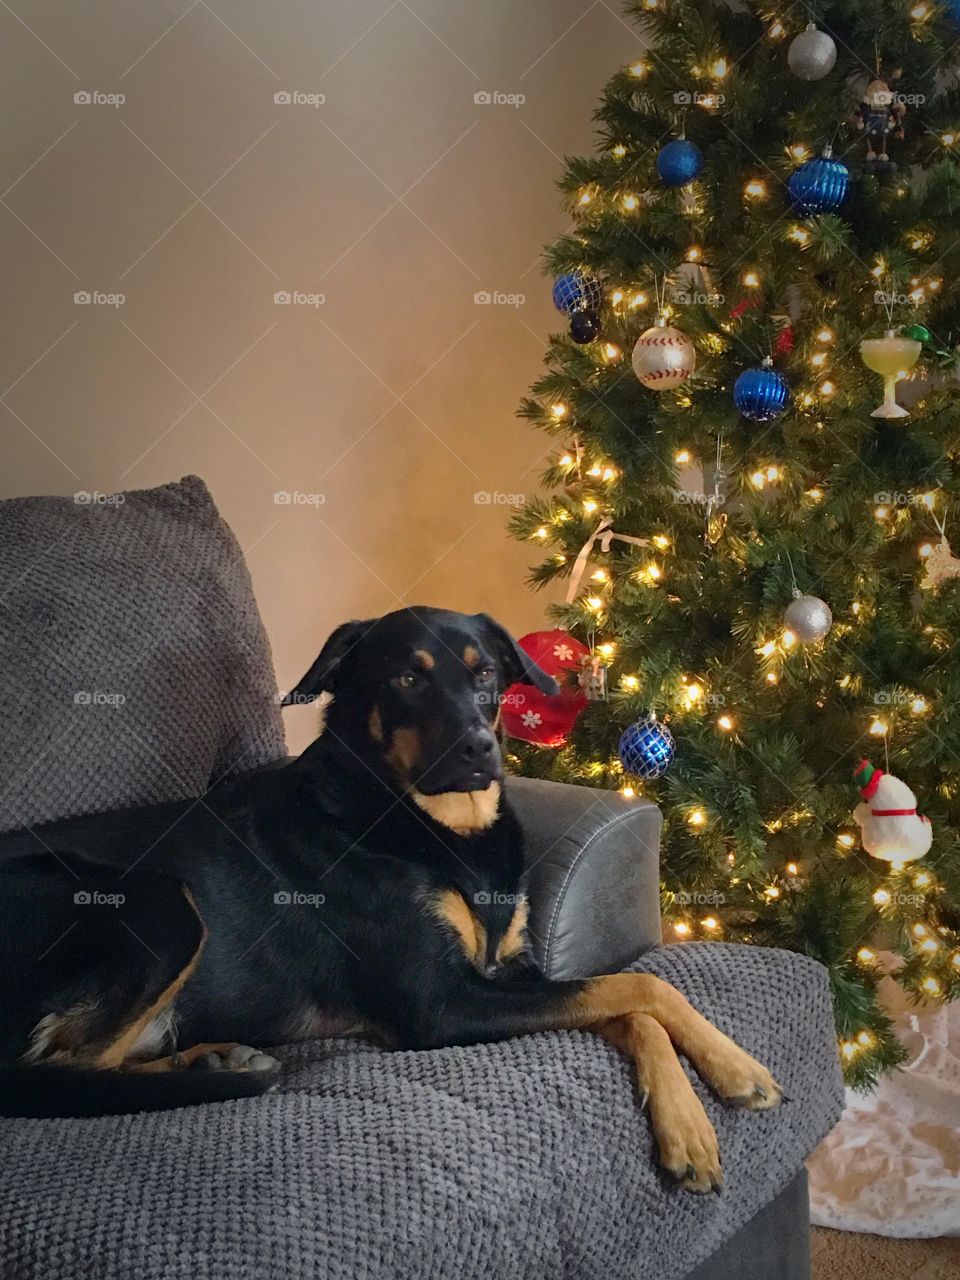 Relaxing next to the Christmas tree 